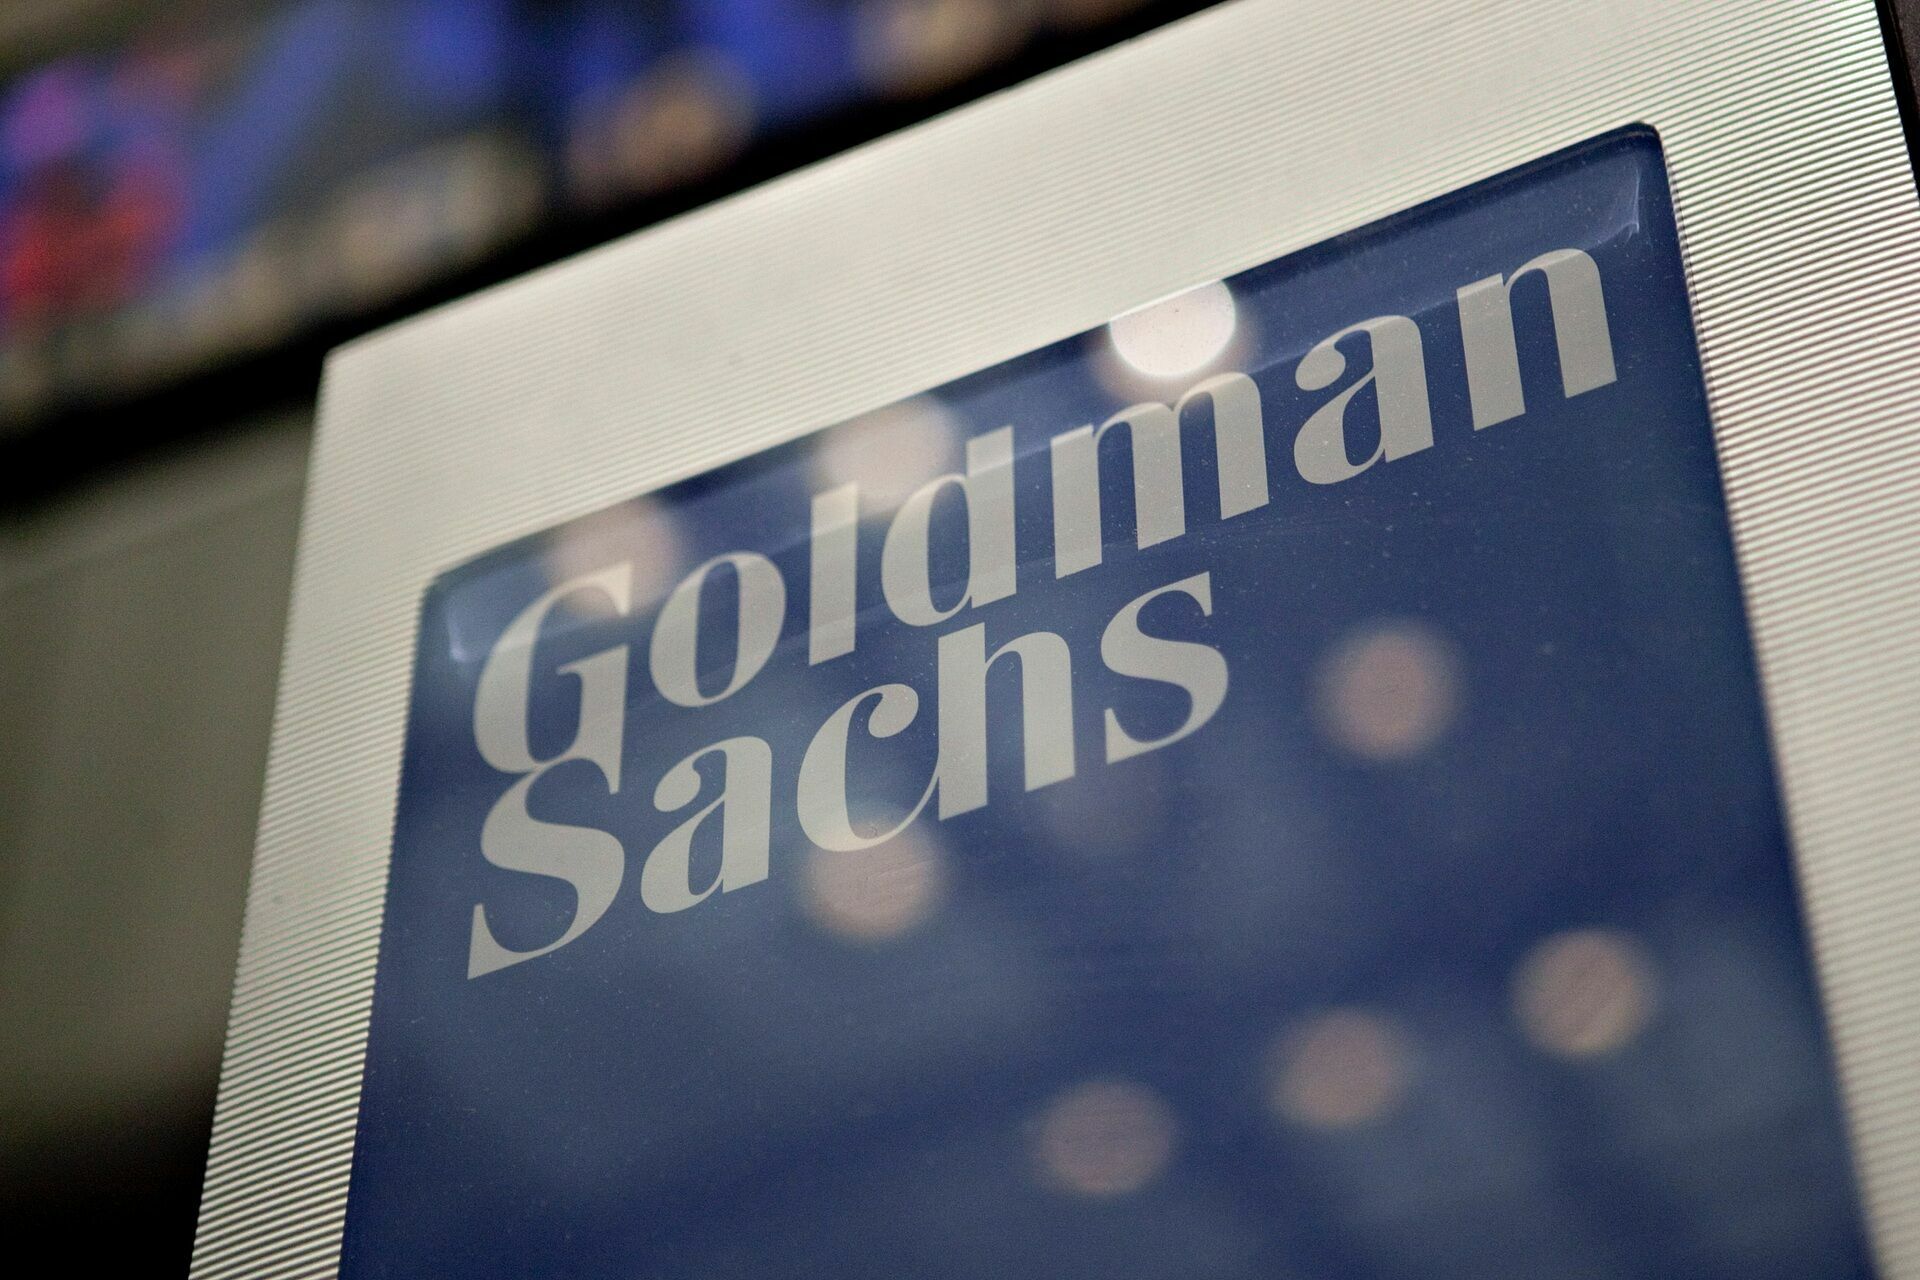 Banks JPMorgan Chase and Goldman Sachs suspended operations on the public debt of the Russian Federation